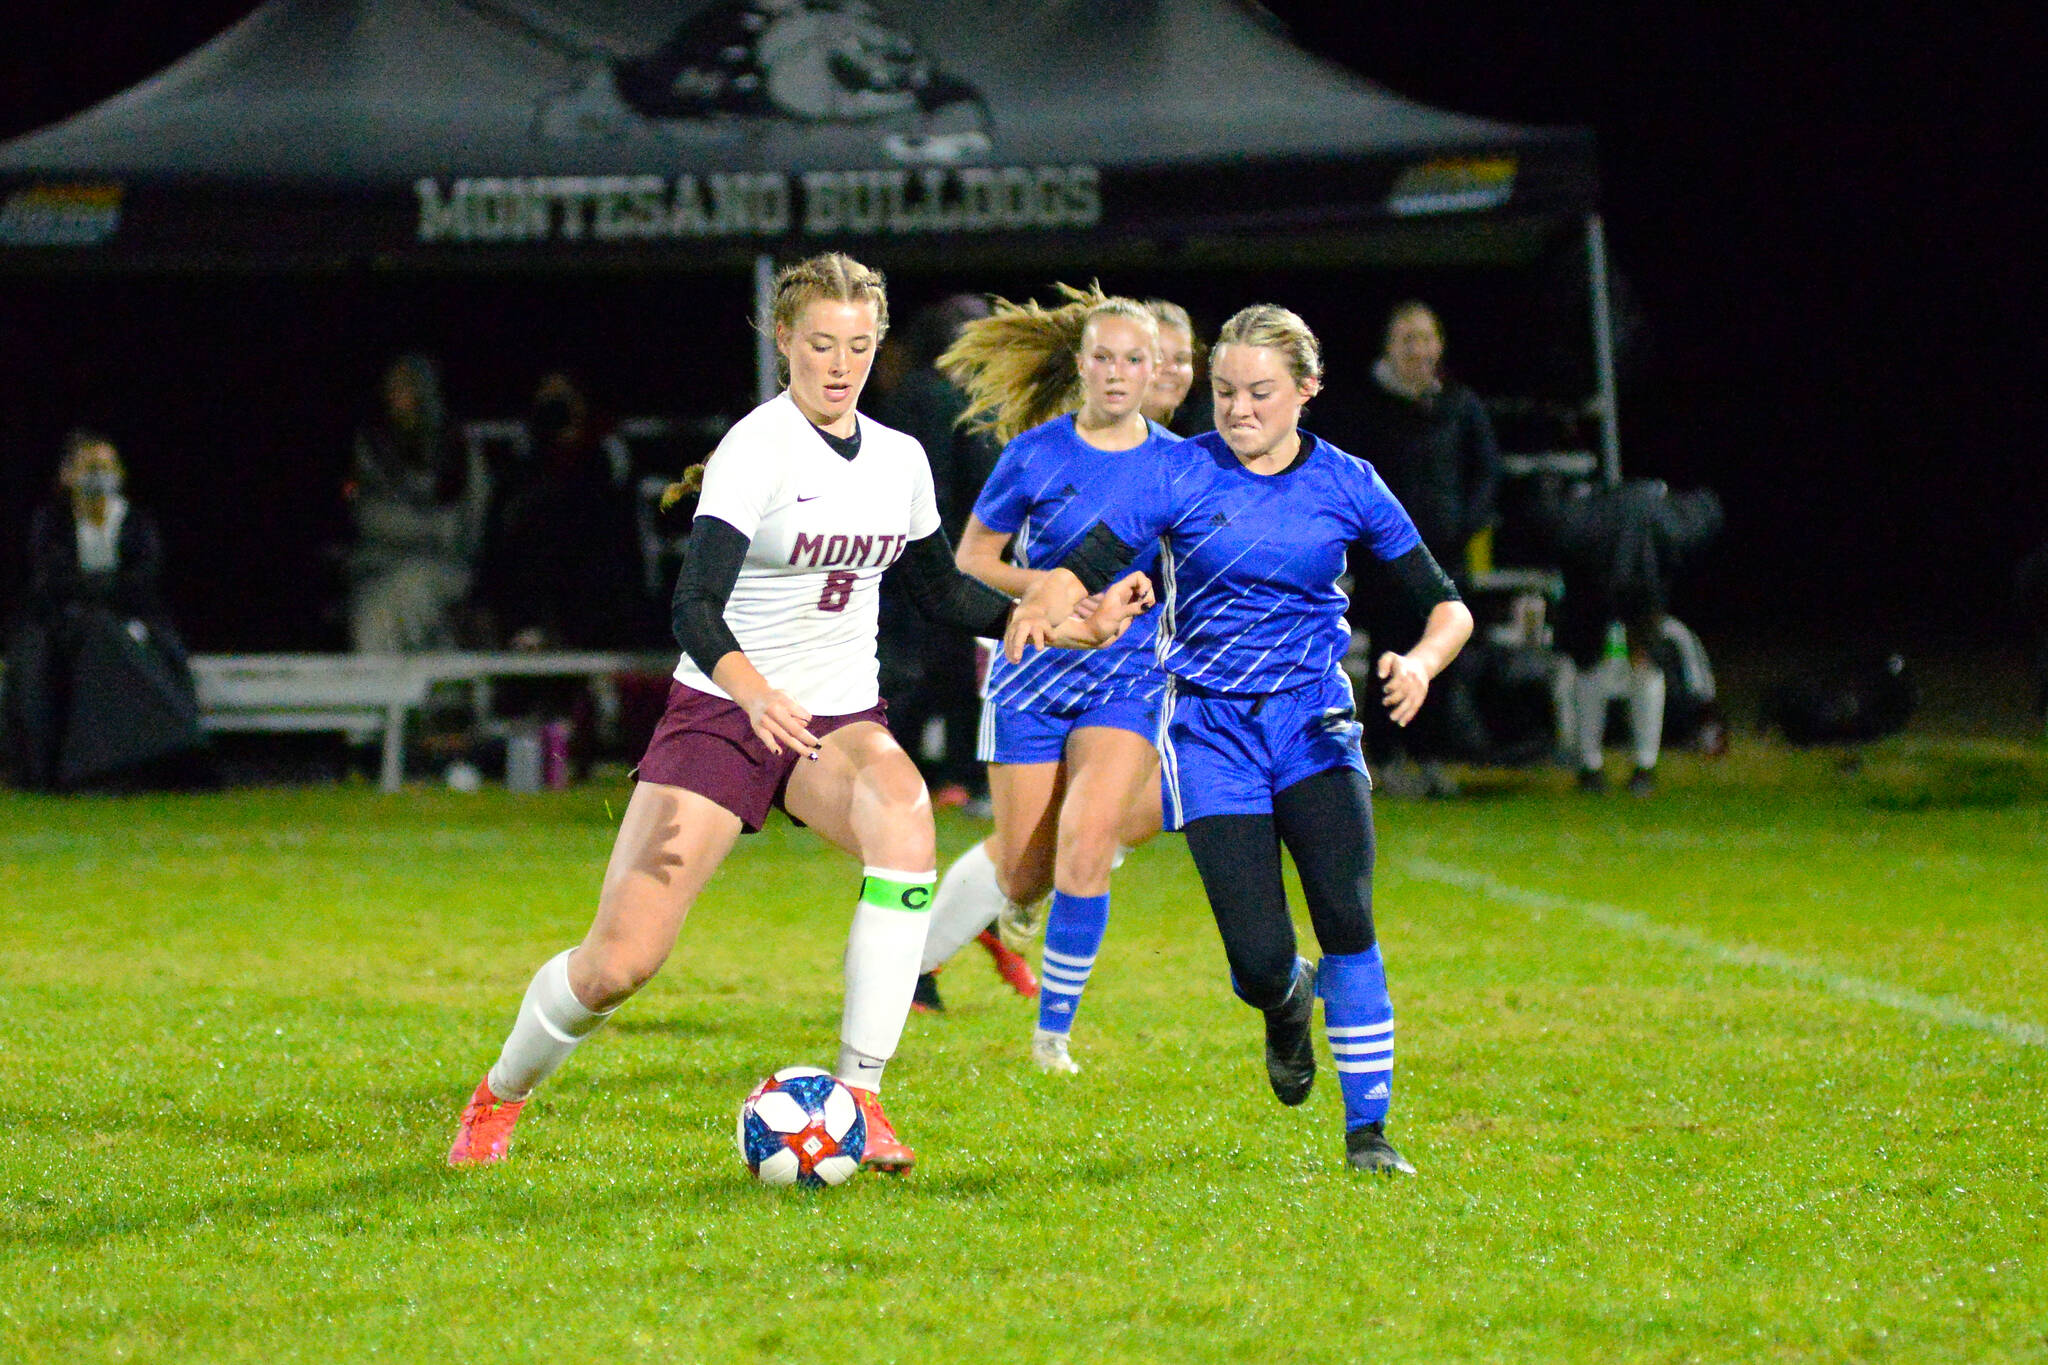 RYAN SPARKS | THE DAILY WORLD Montesano midfielder Paige Lisherness (8) and Elma’s Janessa Sample compete for possession during Monte’s 4-0 win on Tuesday in Elma.